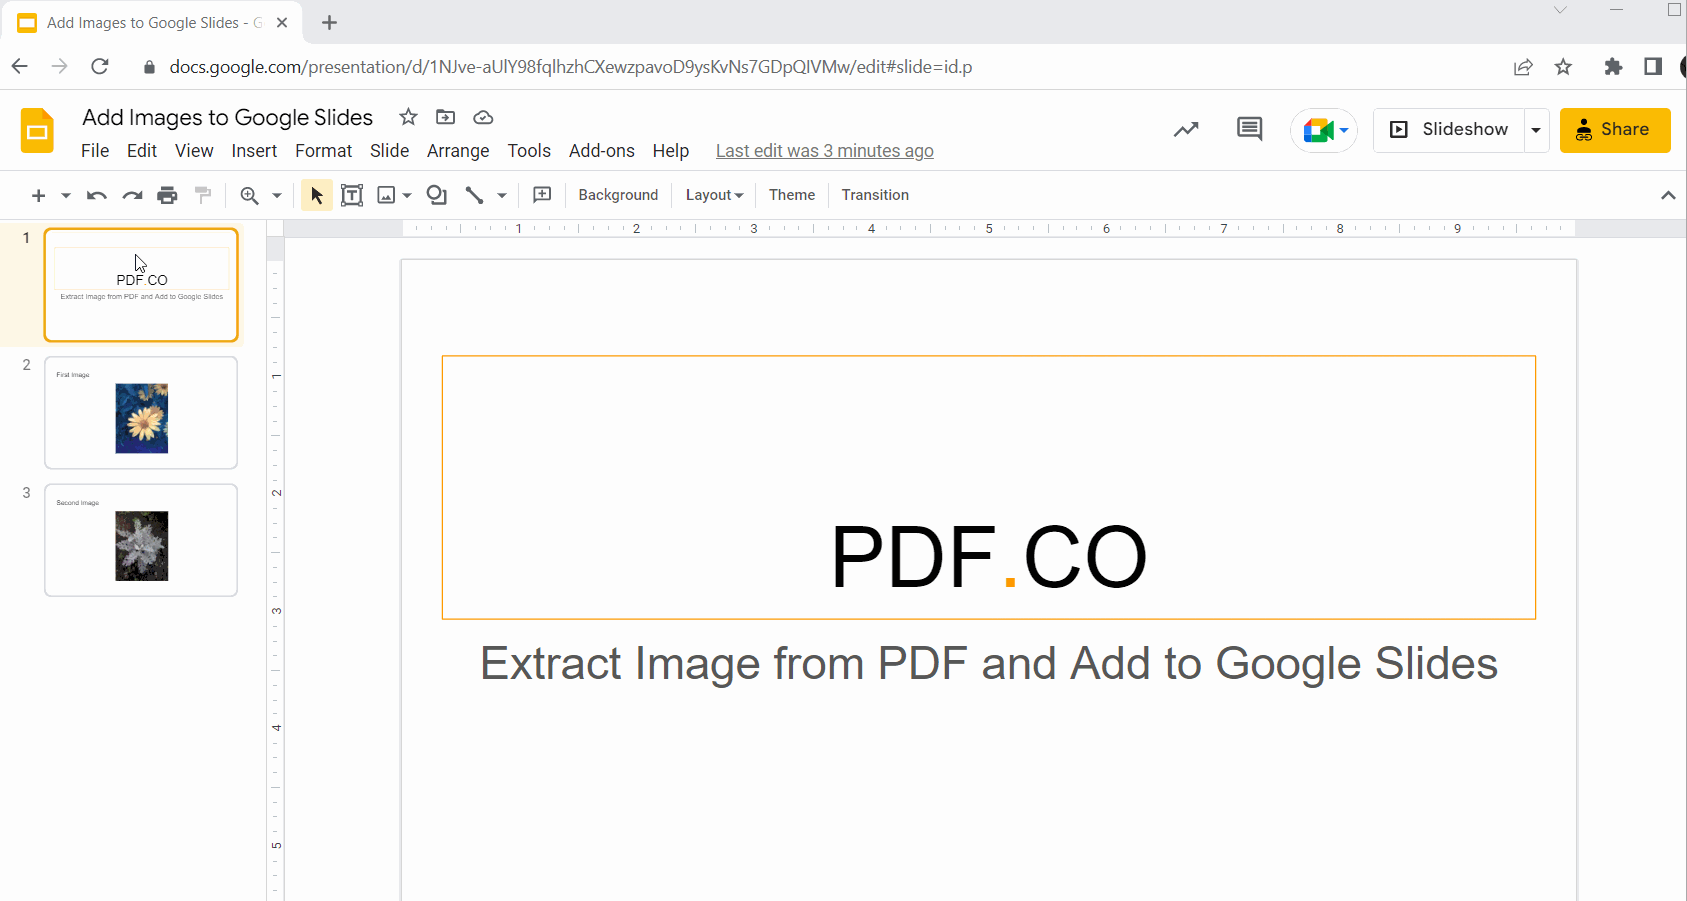 New Slide with Extracted Images